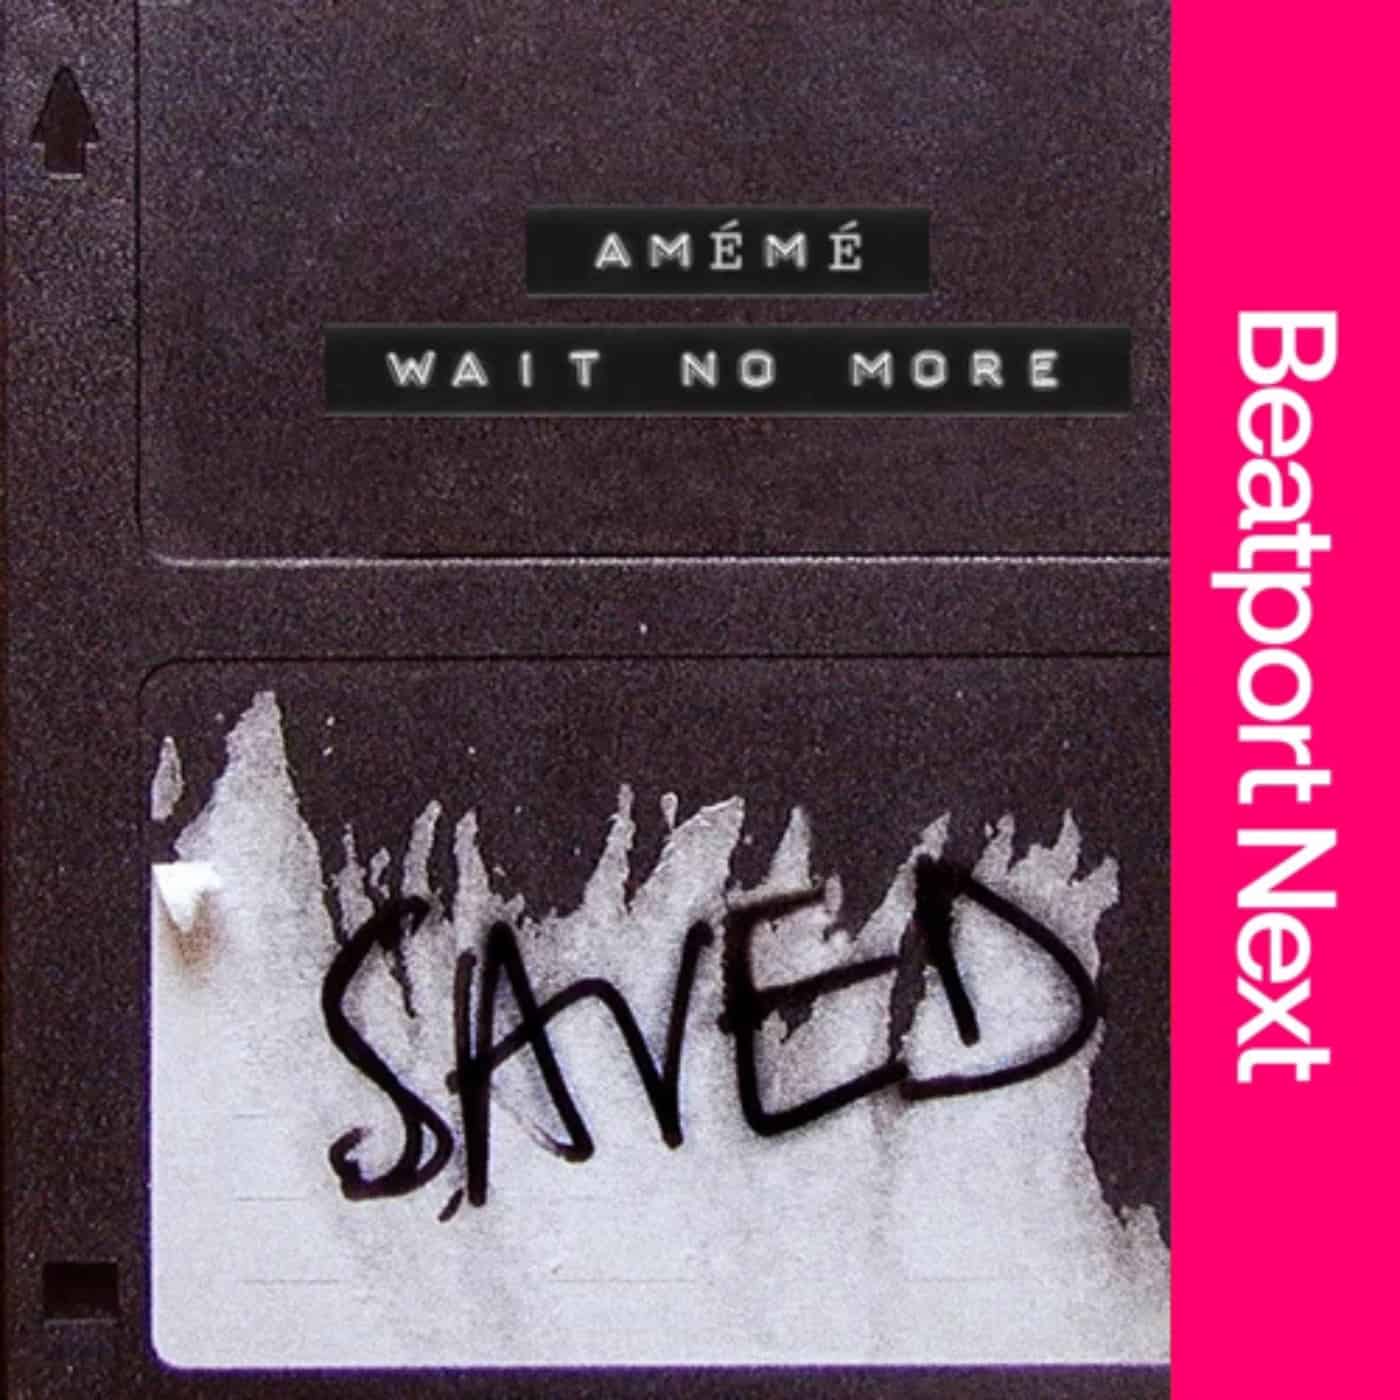 image cover: AMEME - Wait No More / SAVED26901Z